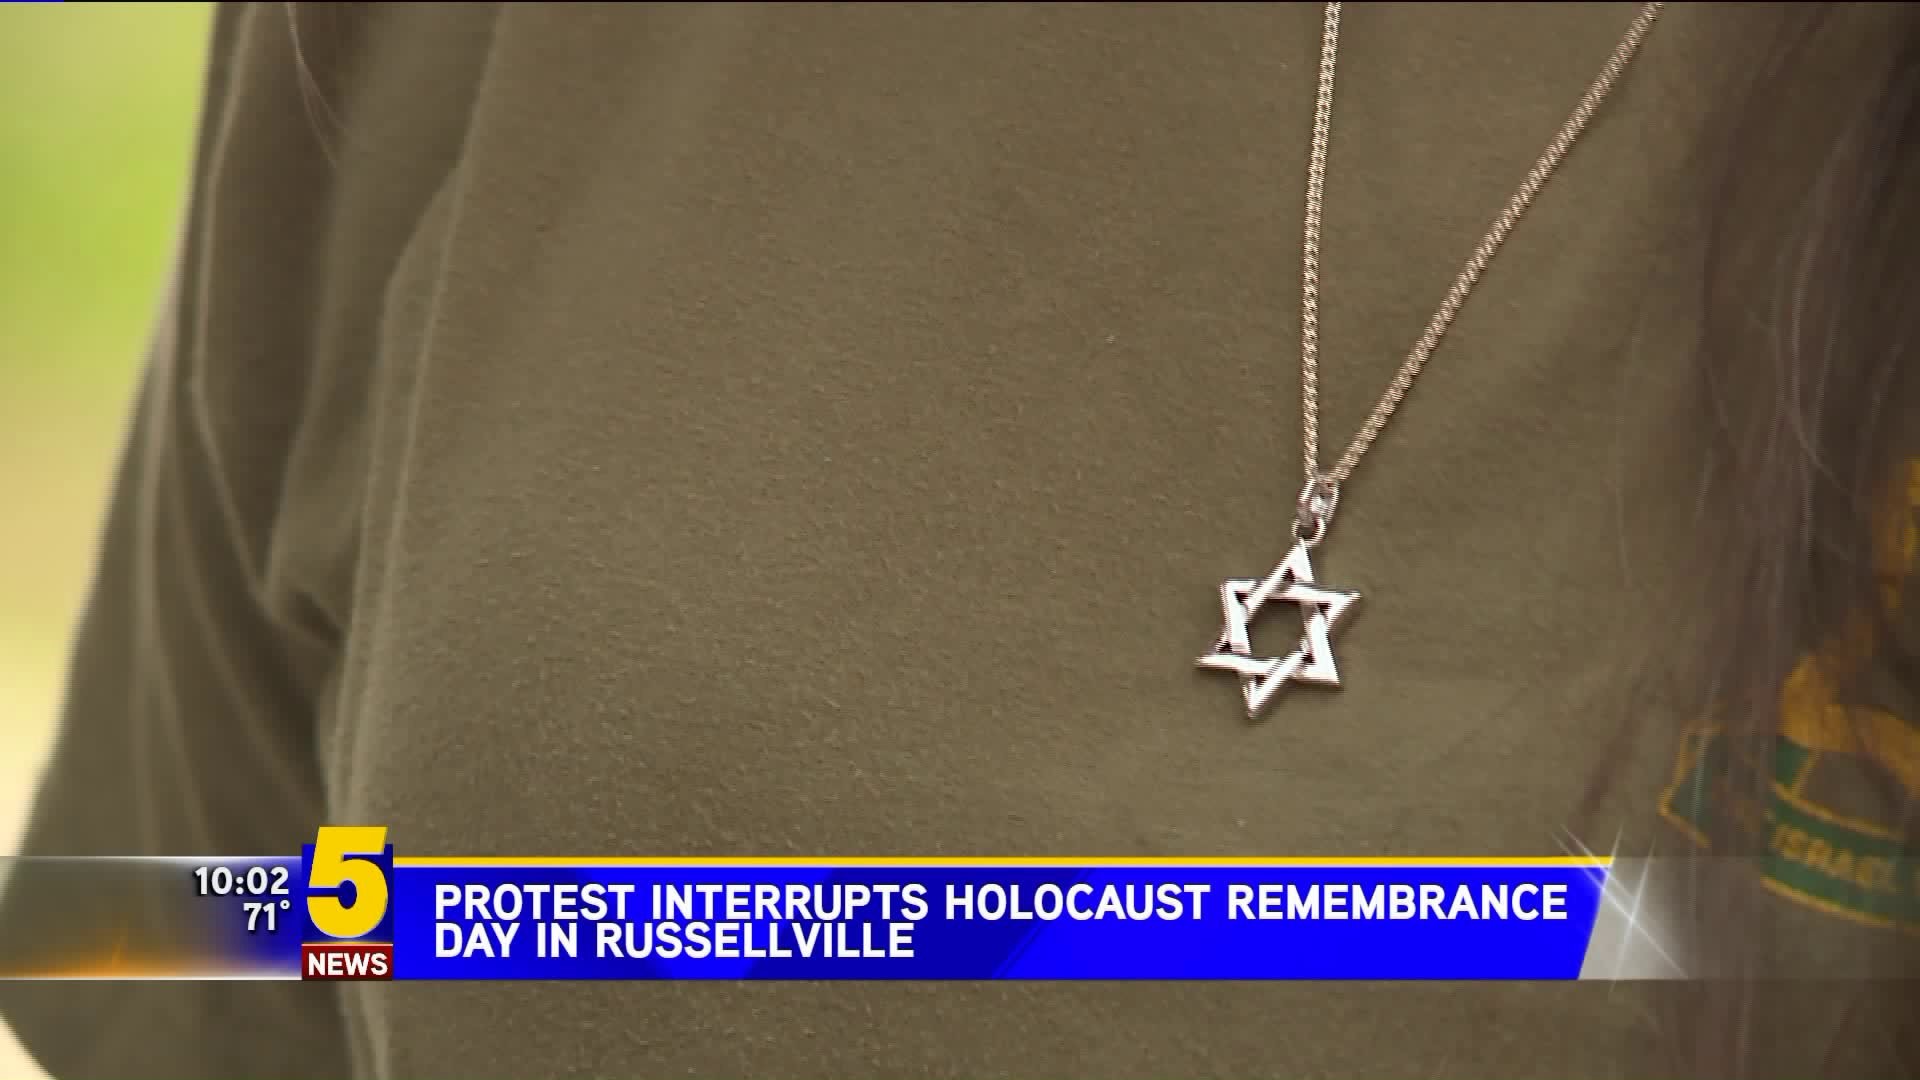 Protest Interrupts Holocaust Remembrance Day In Russellville